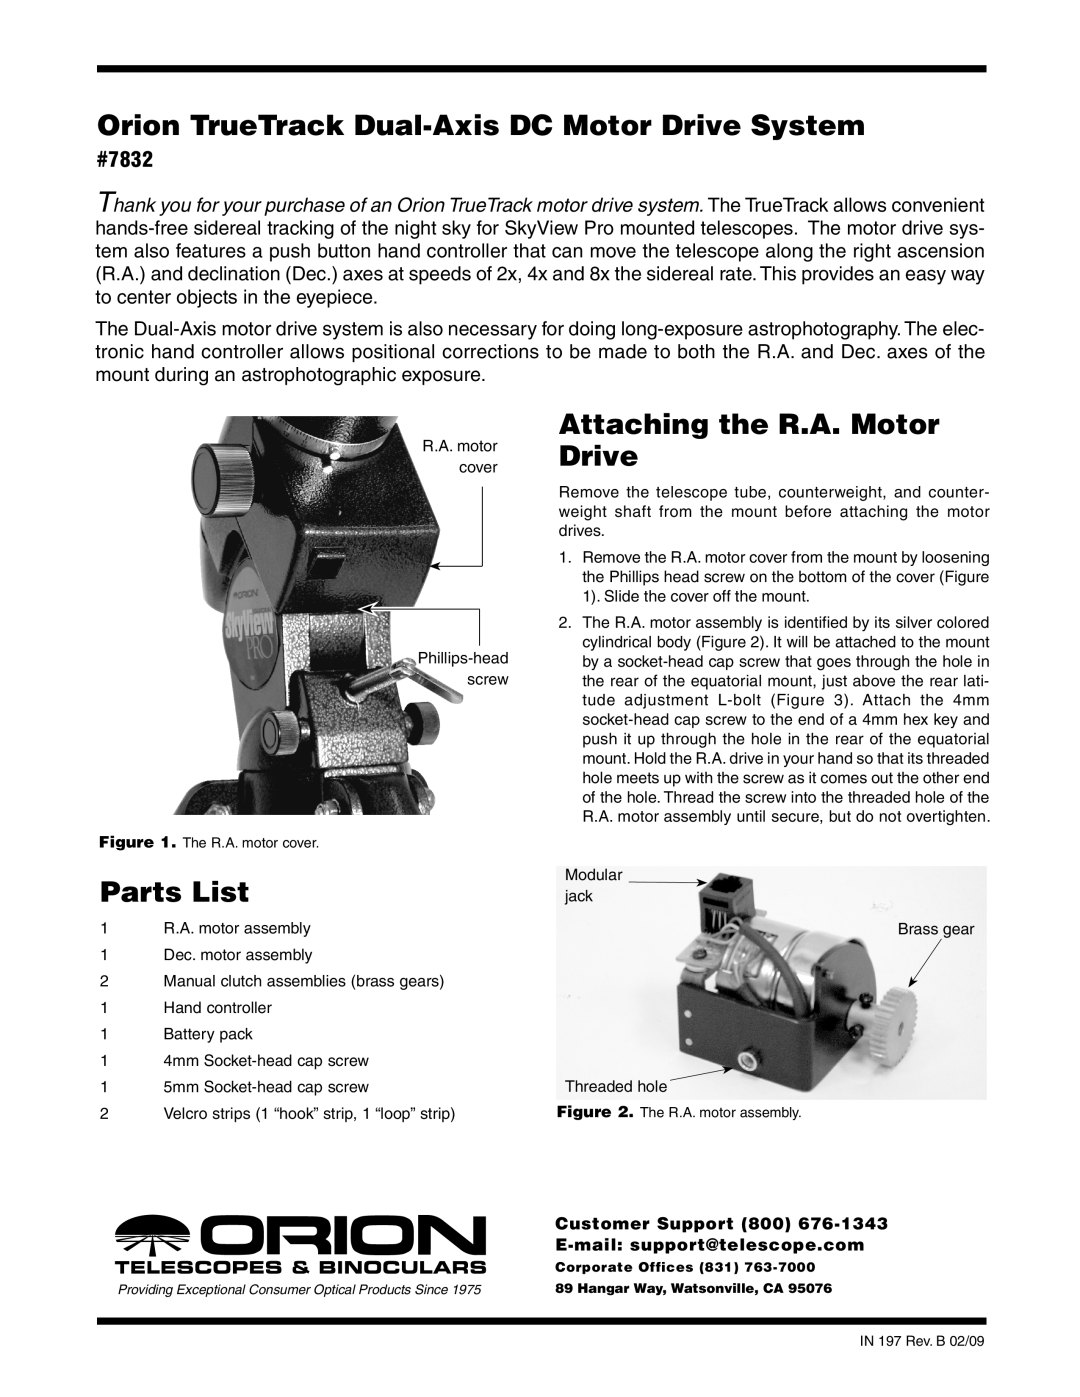 Orion manual Orion TrueTrack Dual-AxisDC Motor Drive System, Parts List, Attaching the R.A. Motor Drive, #7832 